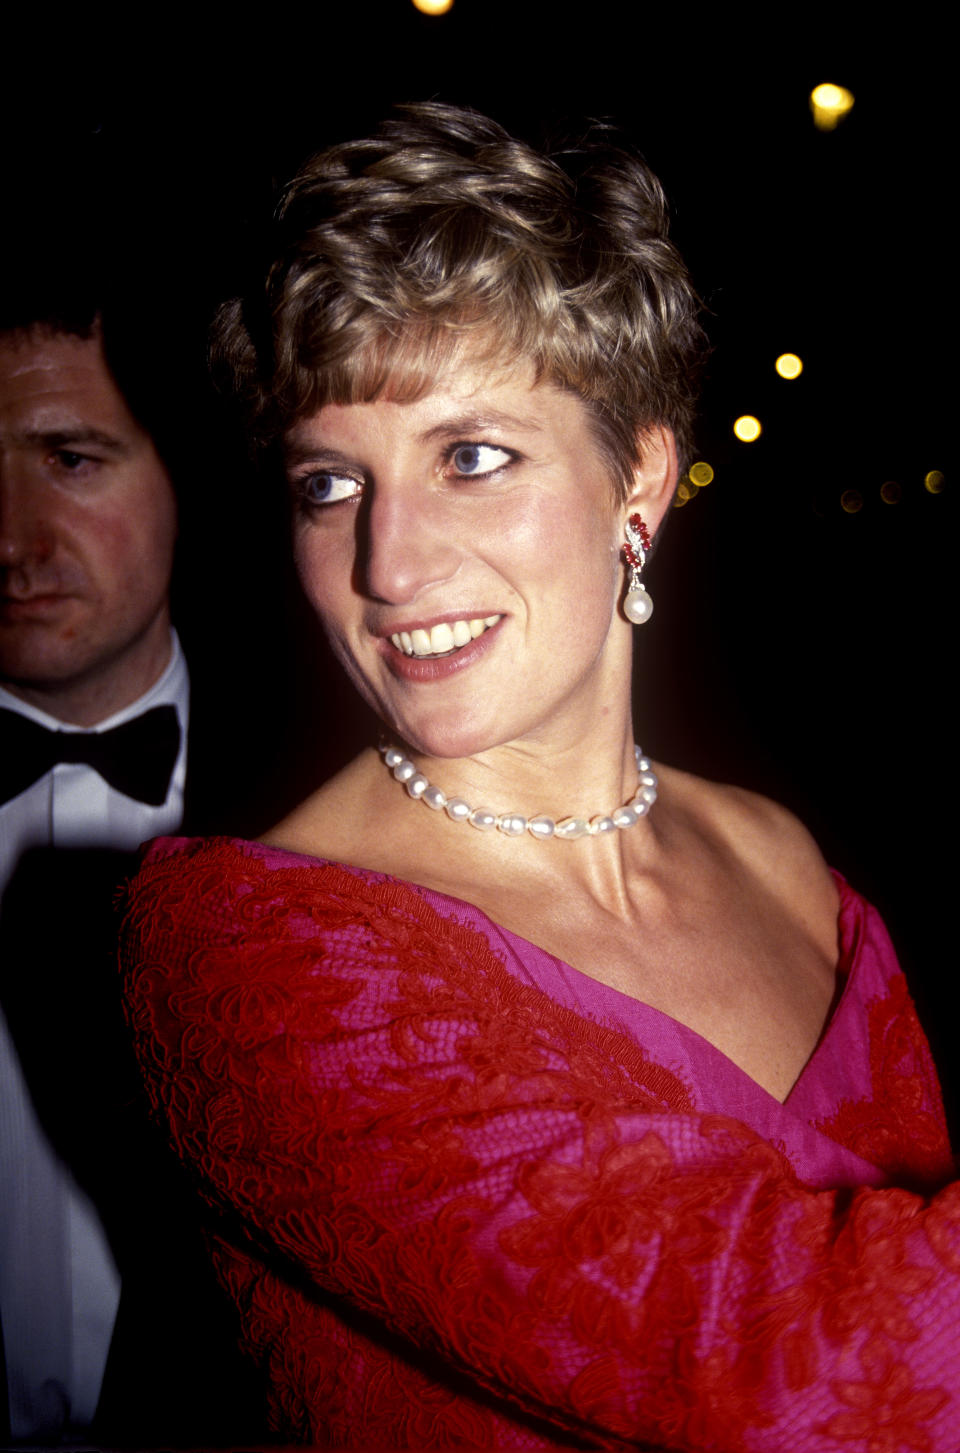 Diana, Princess of Wales, wearing a red and pink outfit with white pearls, at the Royal College of Music, 17th December 1991. (Photo by John Shelley Collection/Avalon/Getty Images)